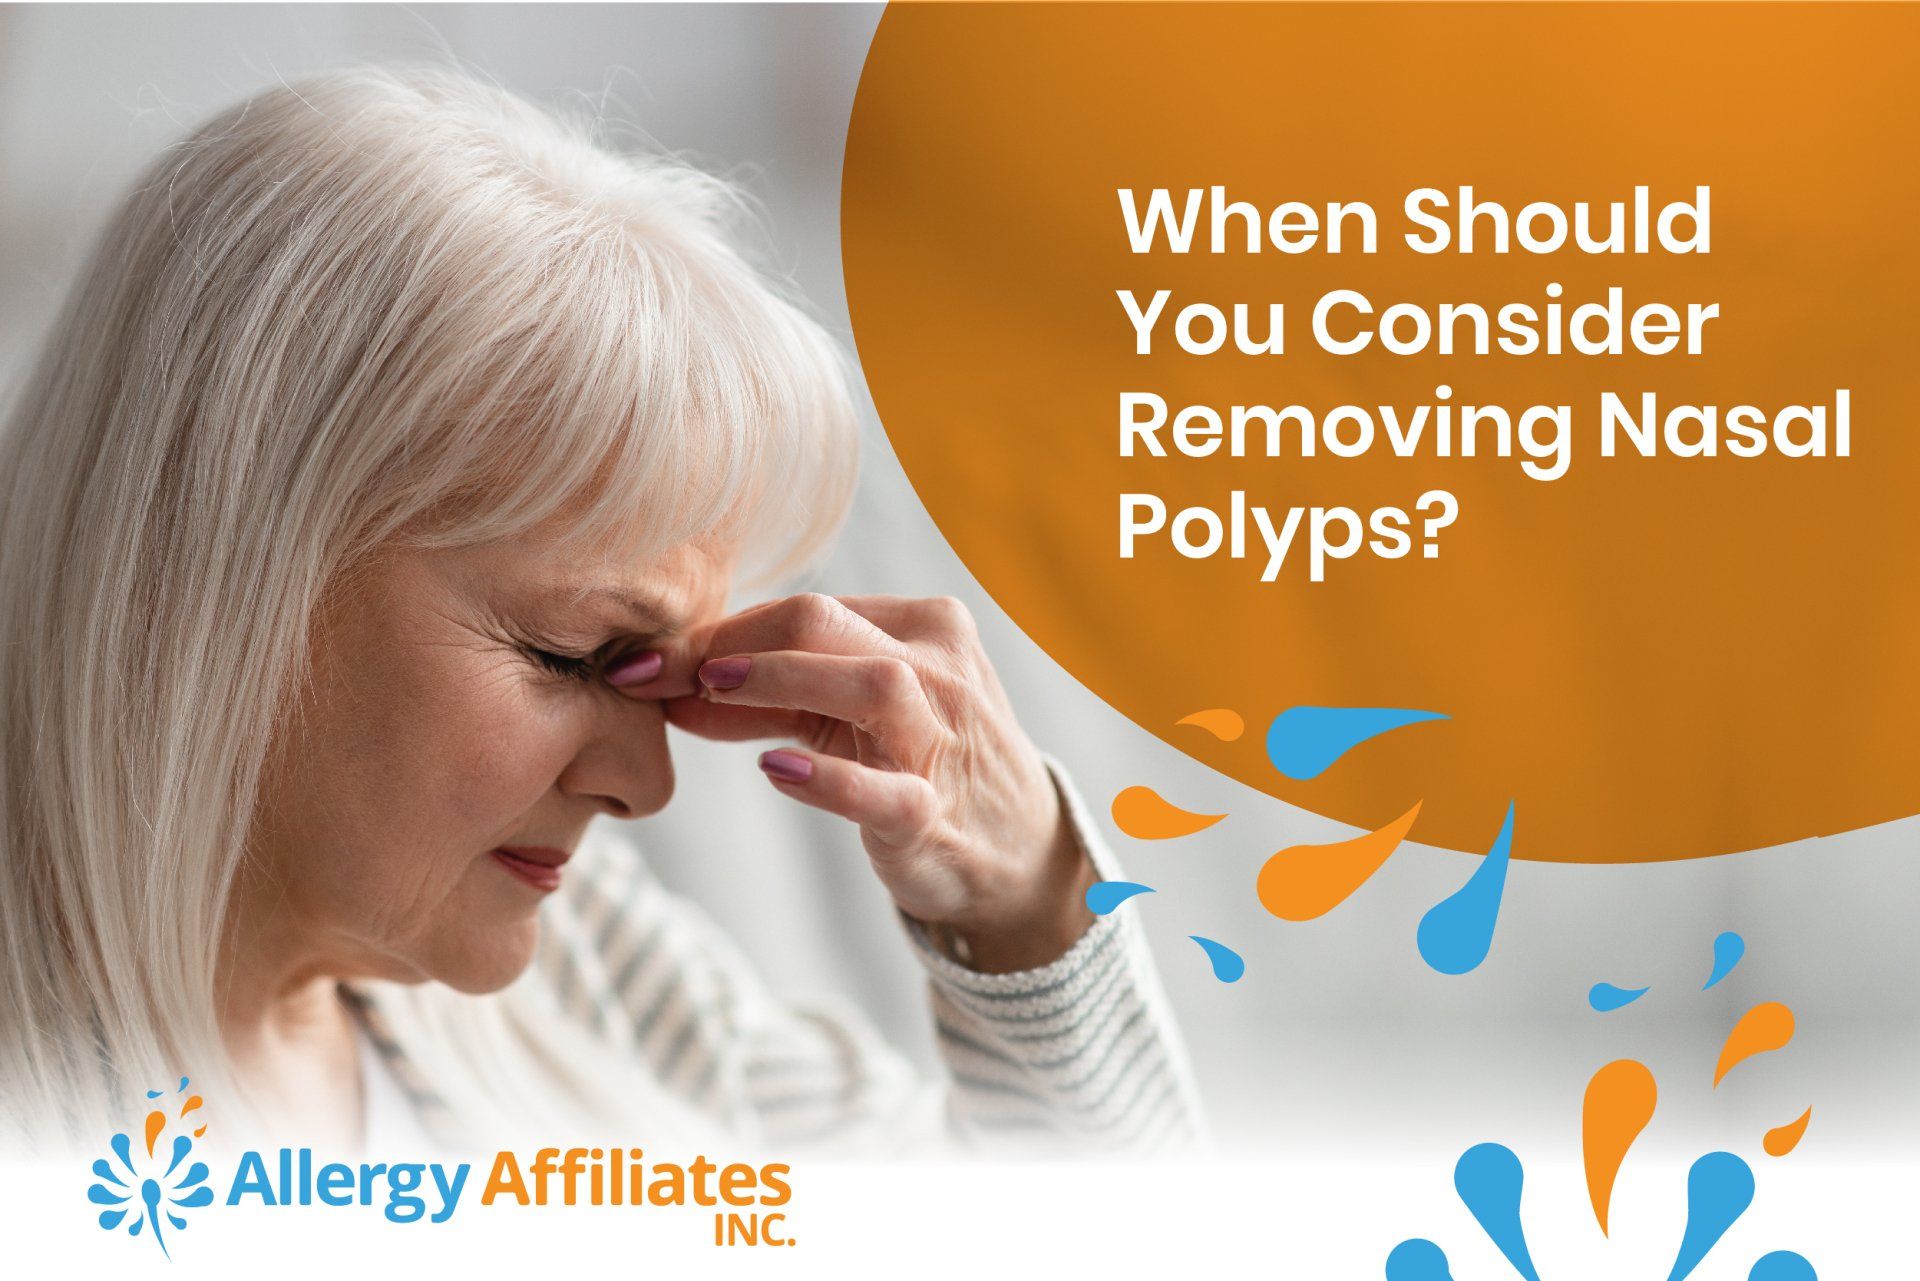 When Should You Consider Removing Nasal Polyps?